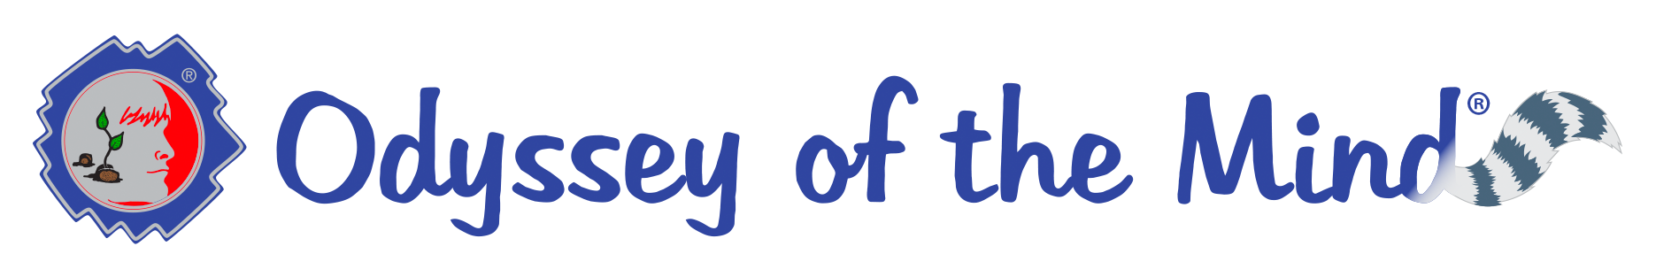 Odyssey of the Mind HQ logo